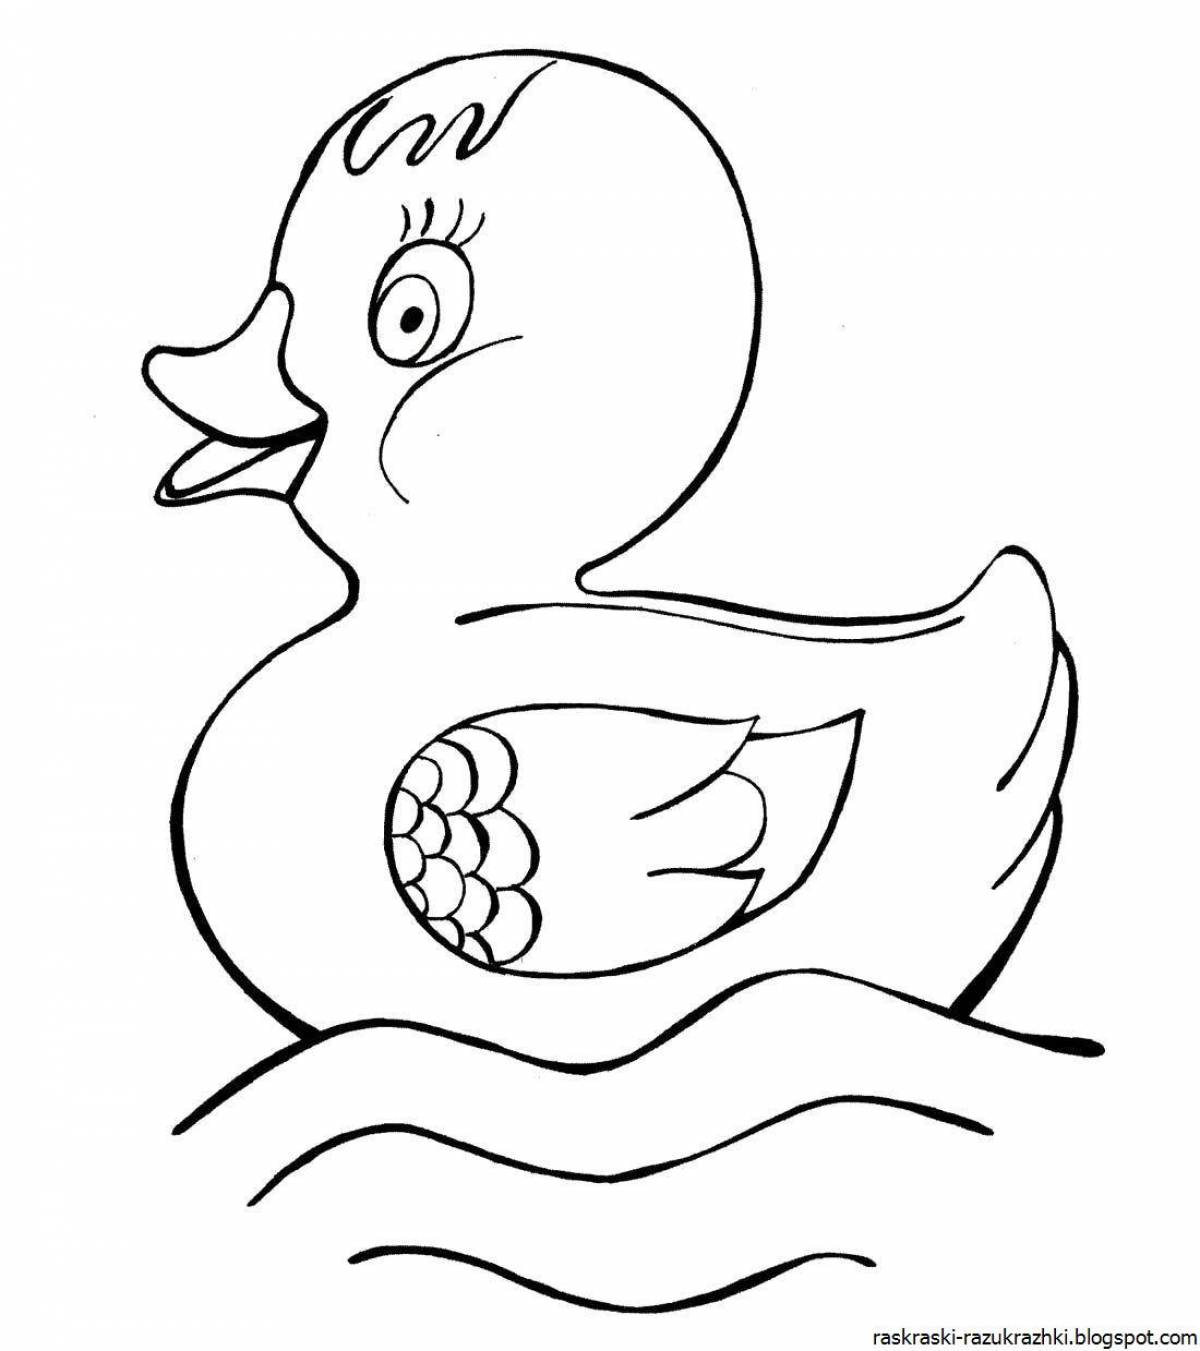 Lalafanfan duck coloring page #6